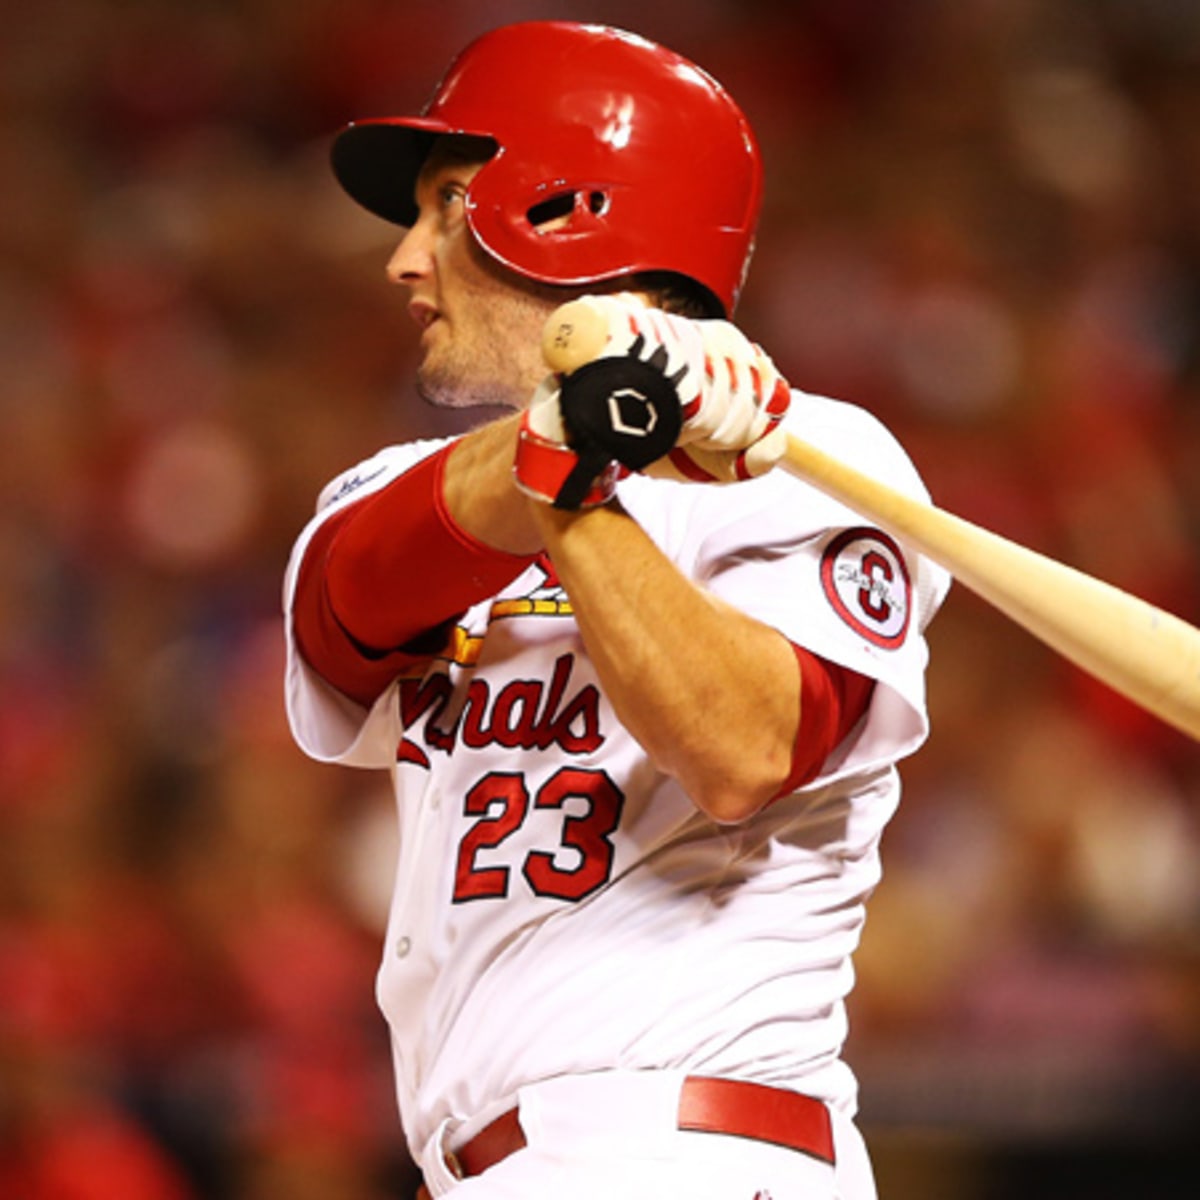 David Freese adds to postseason heroics as Cardinals top Pirates in Game 5  - Sports Illustrated